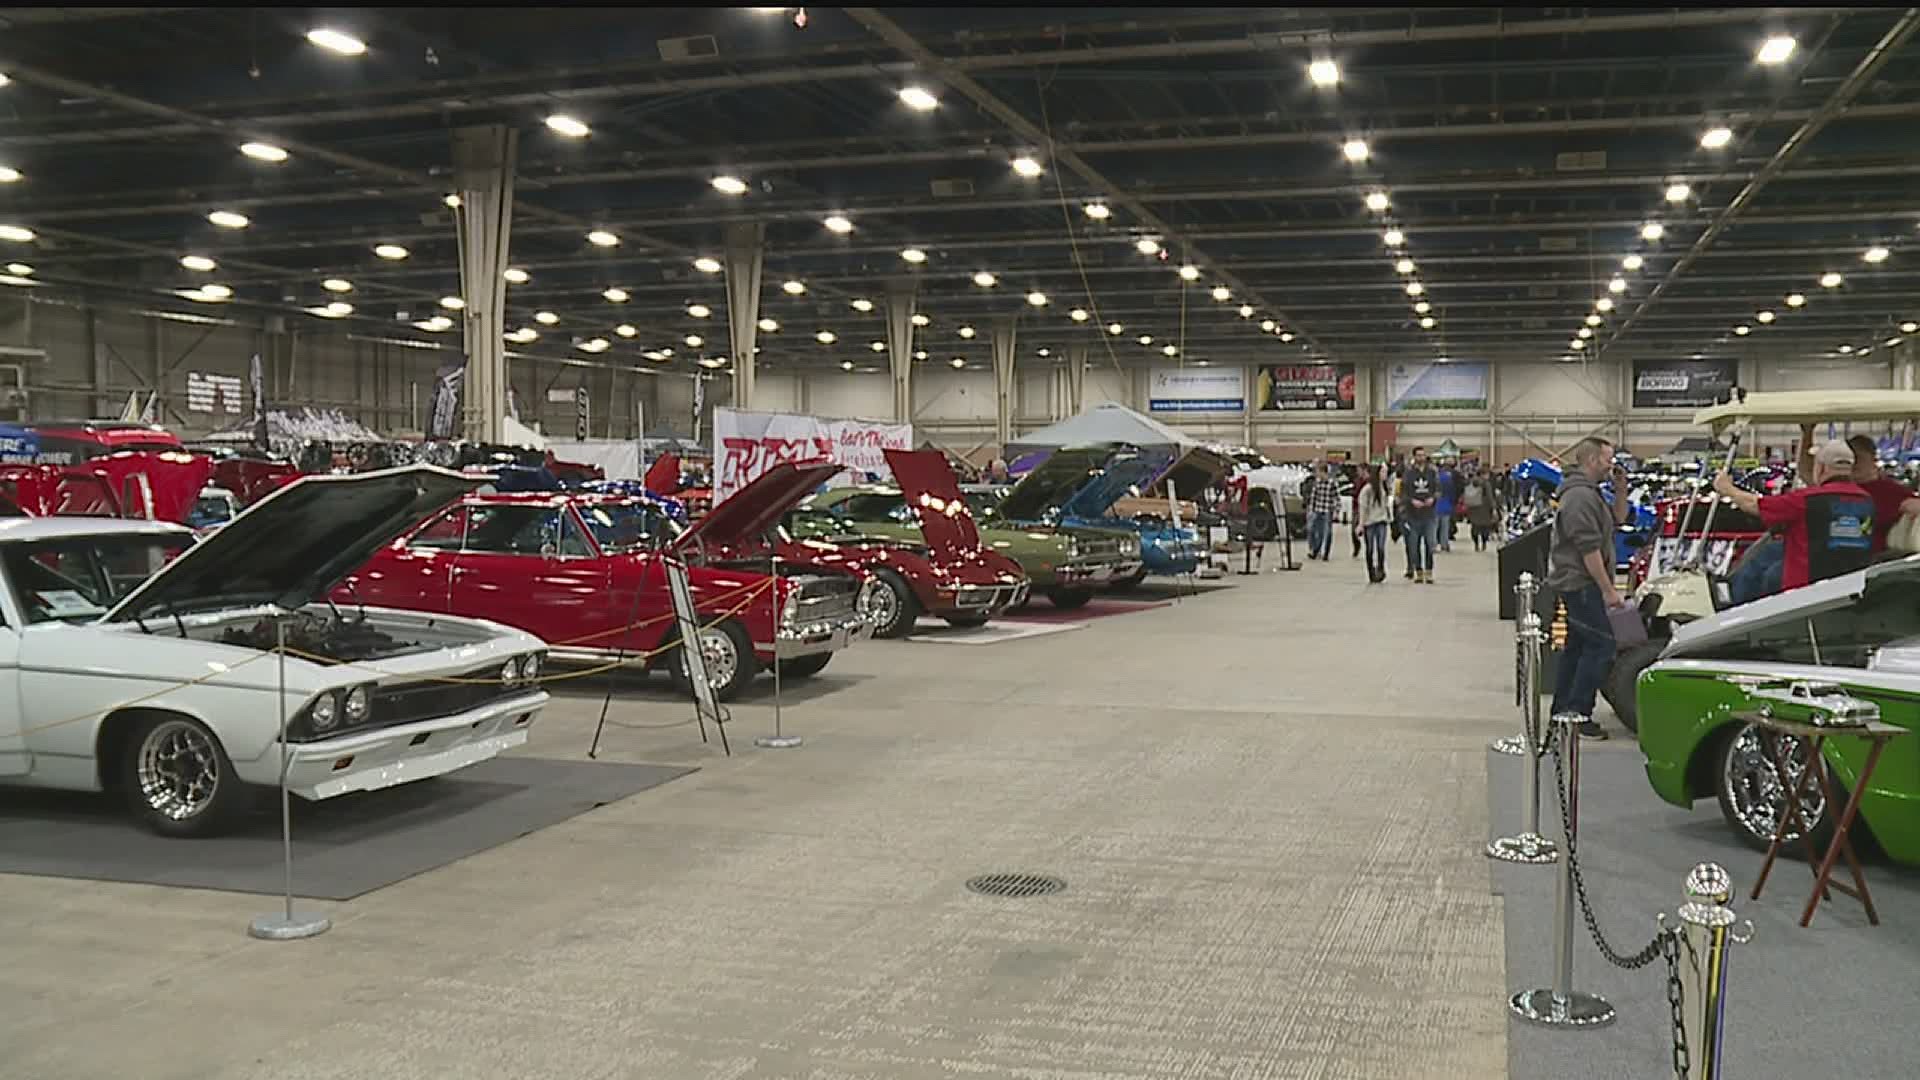 Race cars deliver plenty of action at the 2020 Motorama in Harrisburg